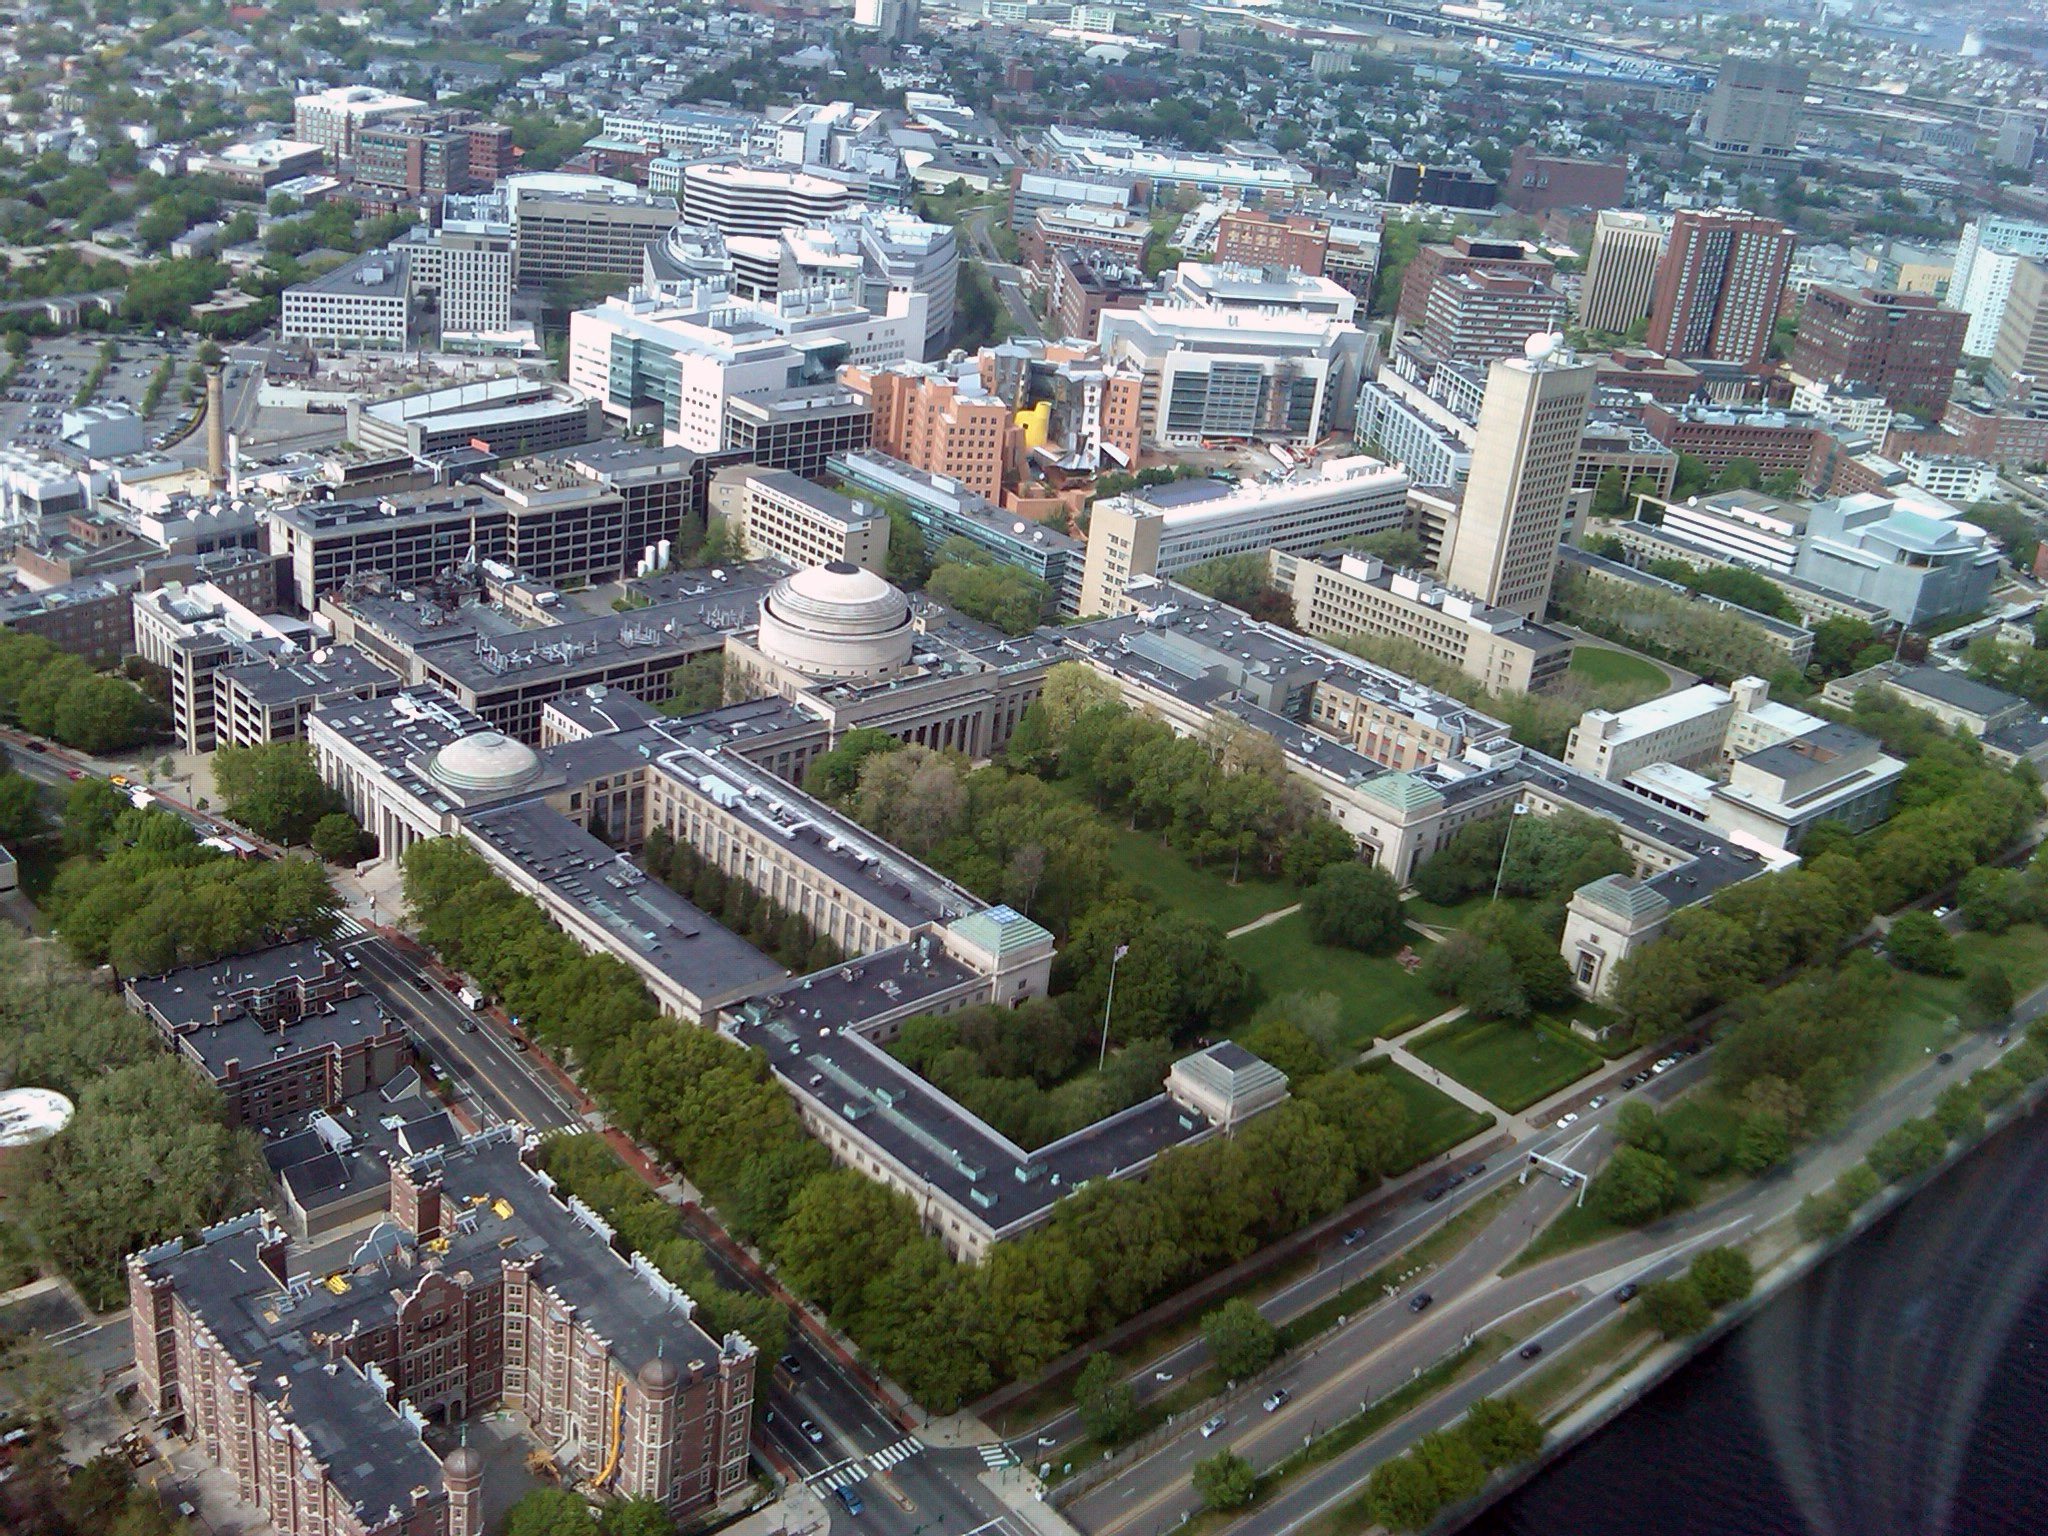   Aerial View of MIT's Current Campus in Cambridge, courtesy of Wikipedia  